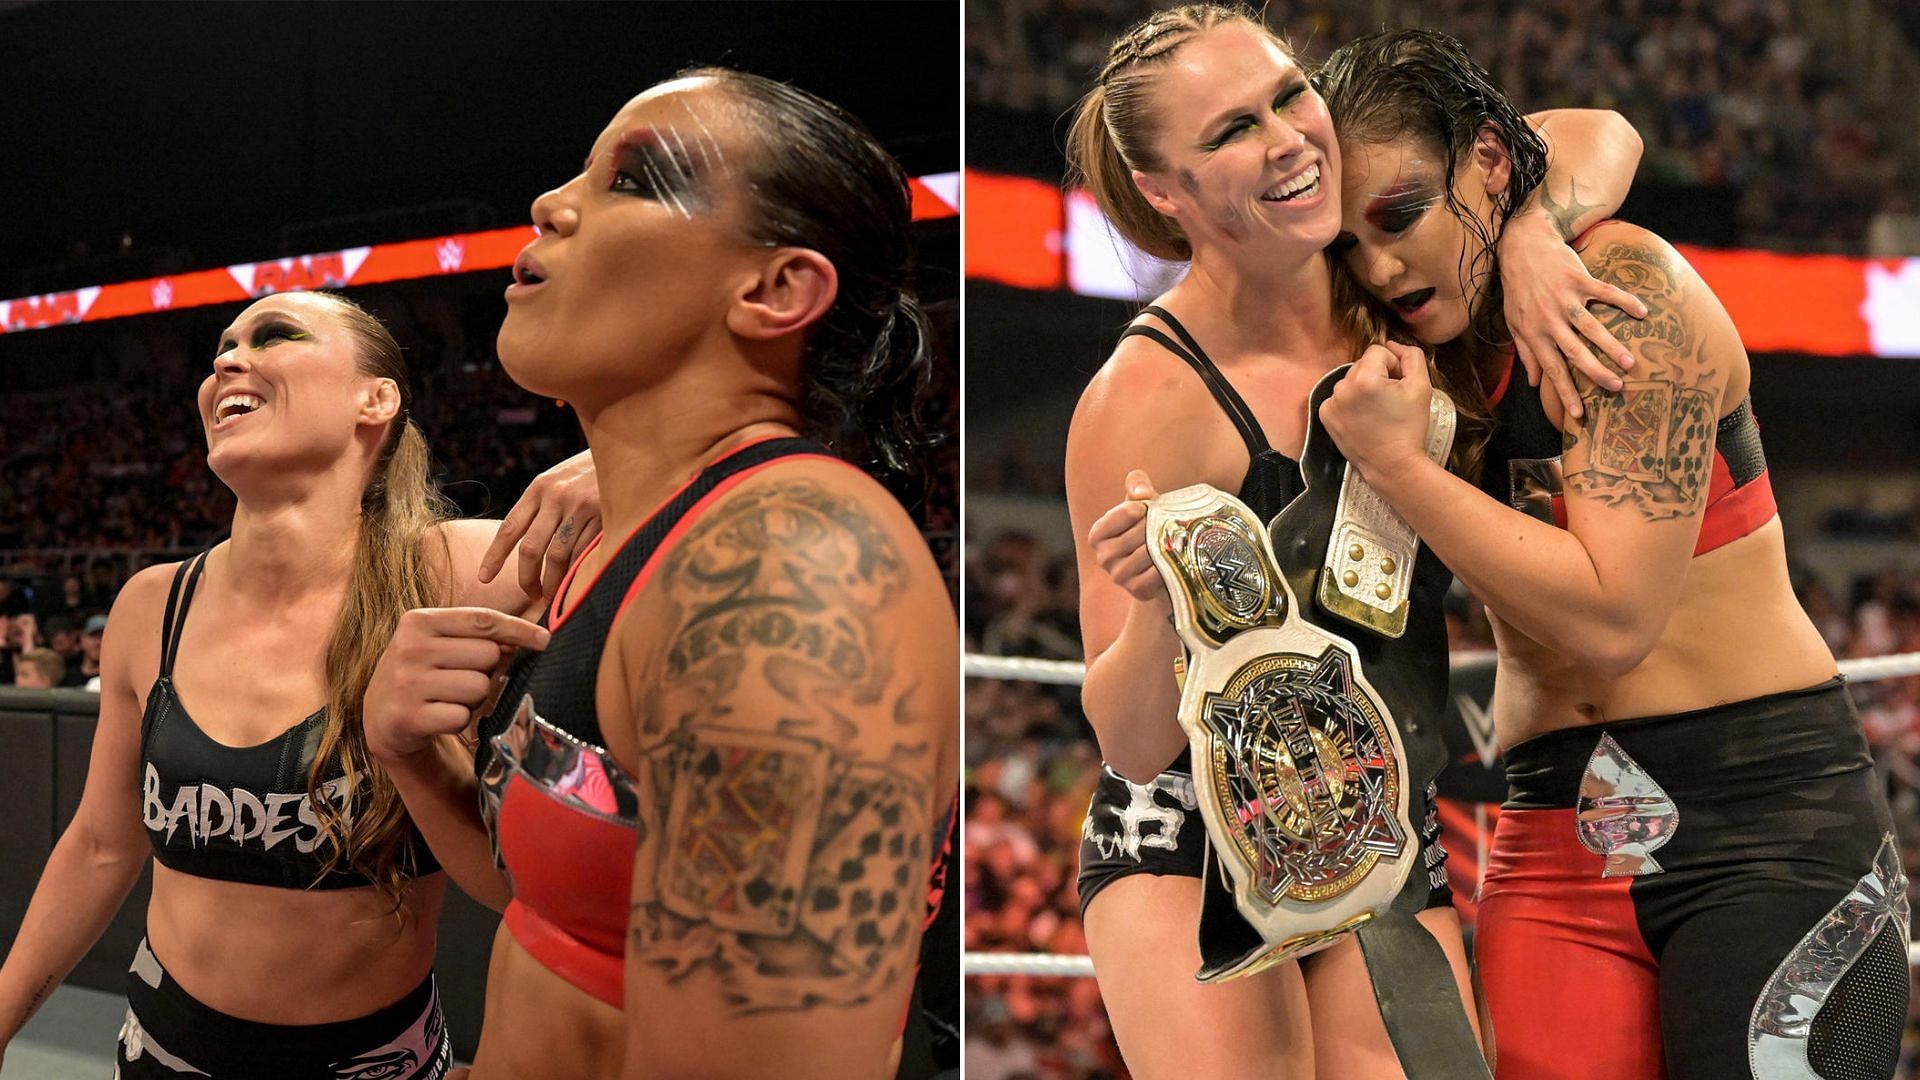 Ronda Rousey and Shayna Baszler are the current WWE Women